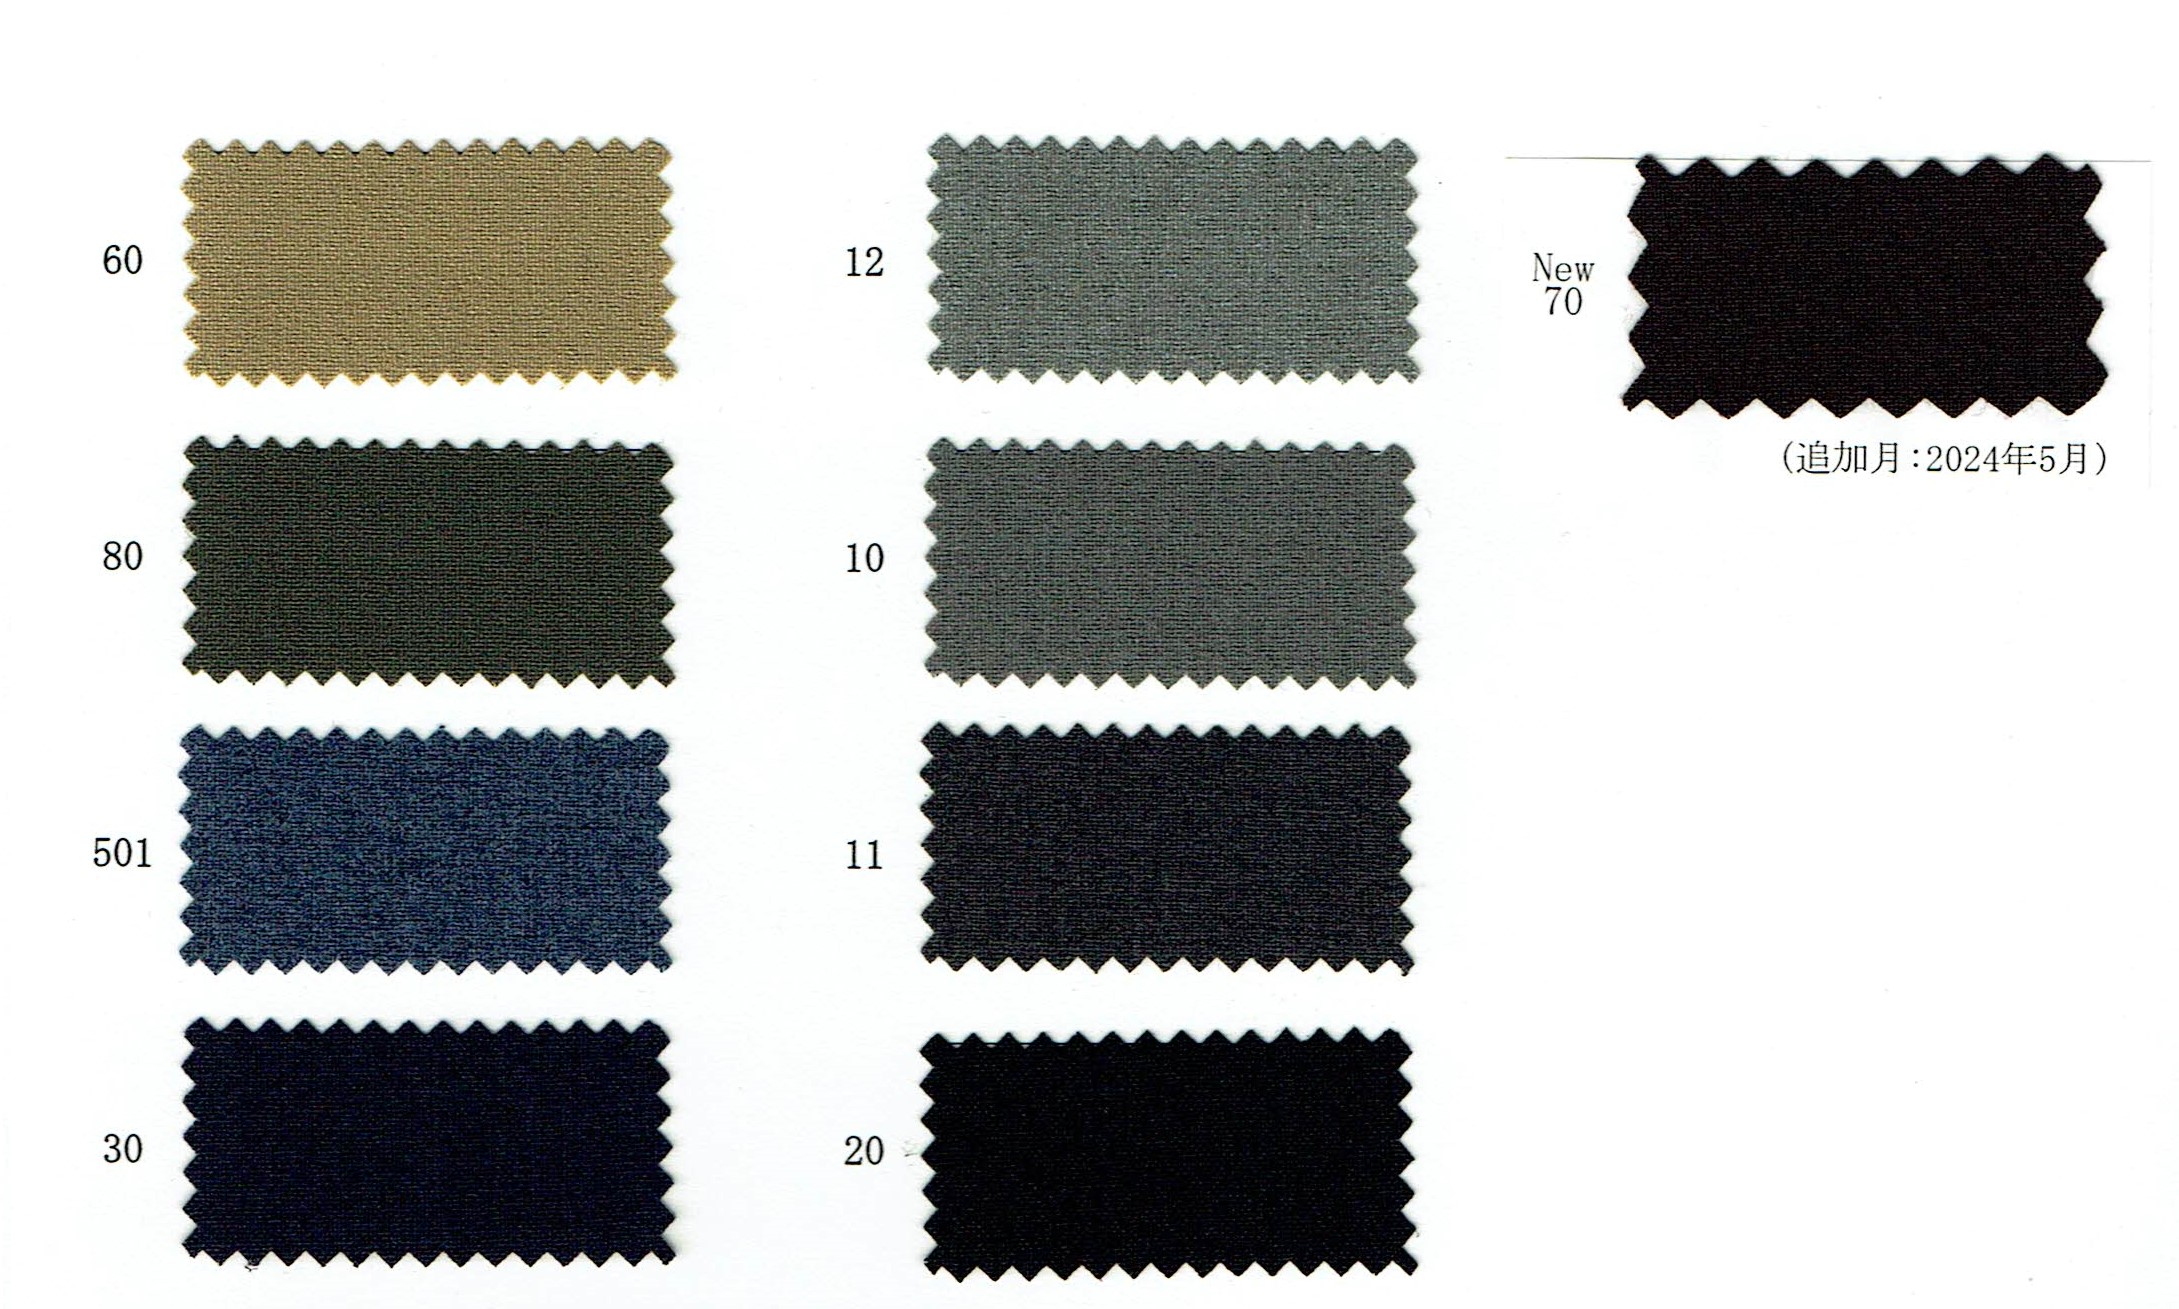 View POLYESTER50/CONJUGATED FIBER[POLYESTER]50CONJUGATEDD FIBER[] DYED POPLINCONJUGATEDD FIBER[] DYED POPLIN